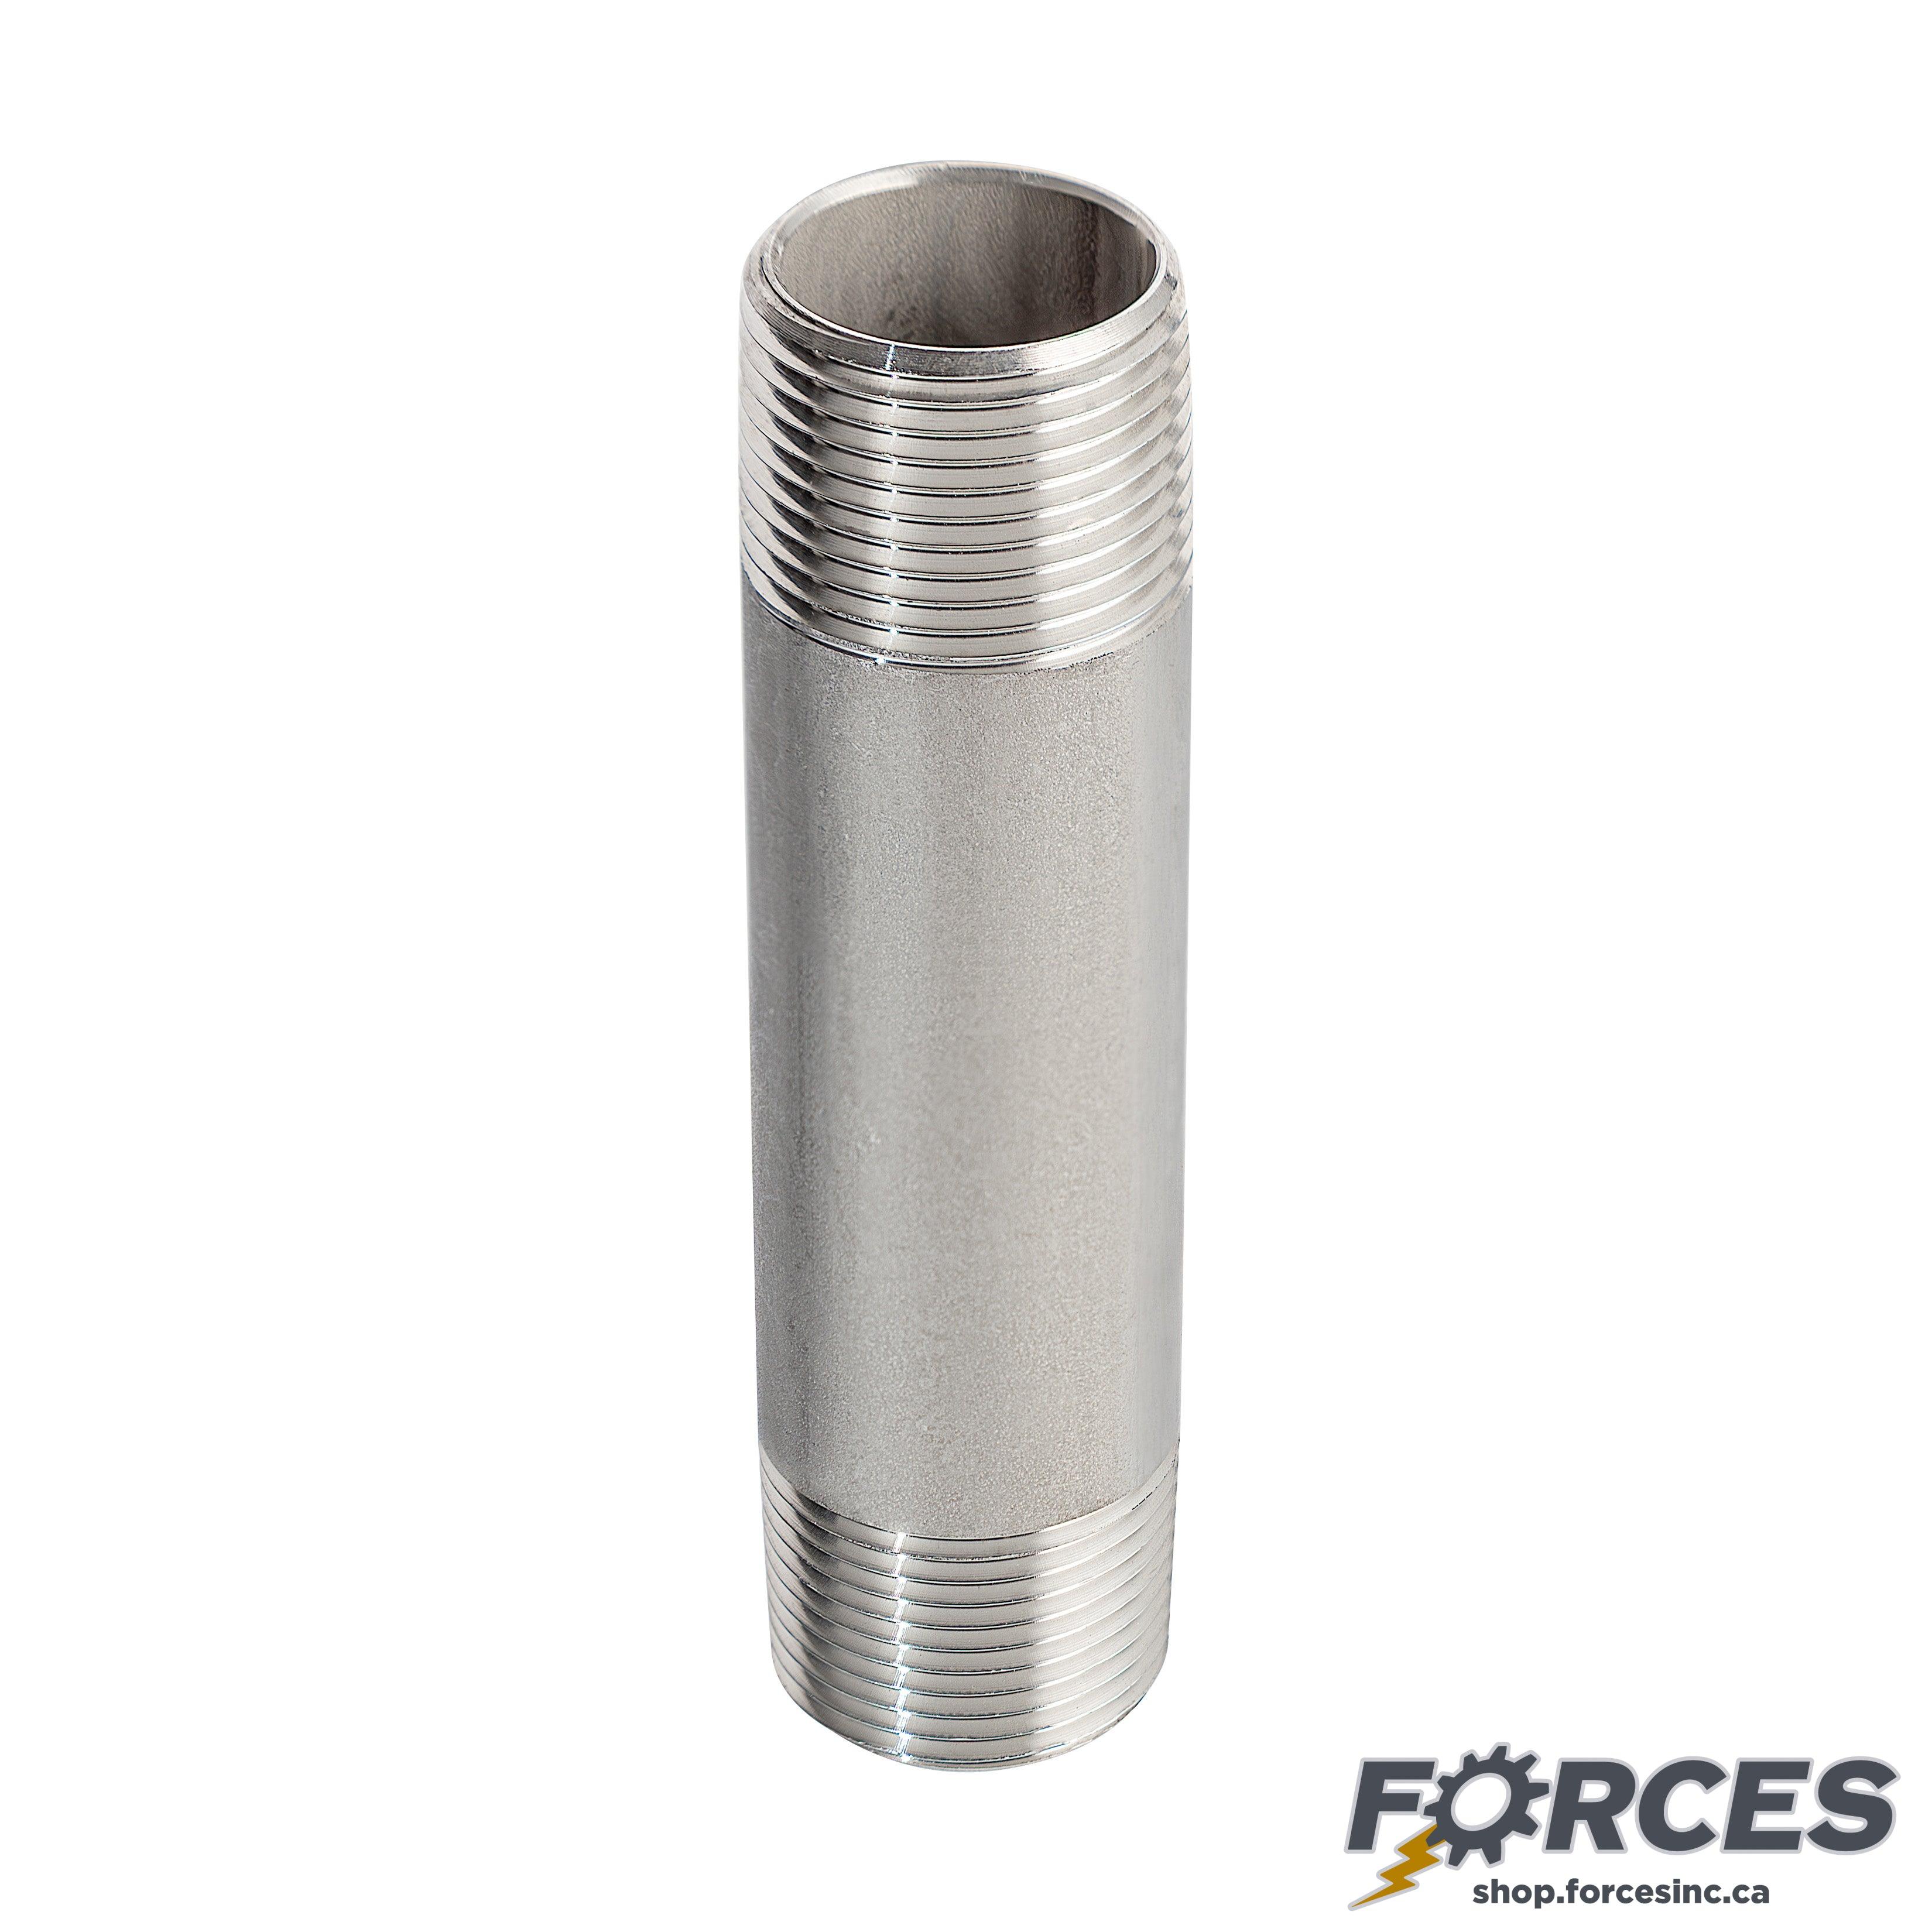 3" X 6" Long Nipple - Stainless Steel 316 - Forces Inc